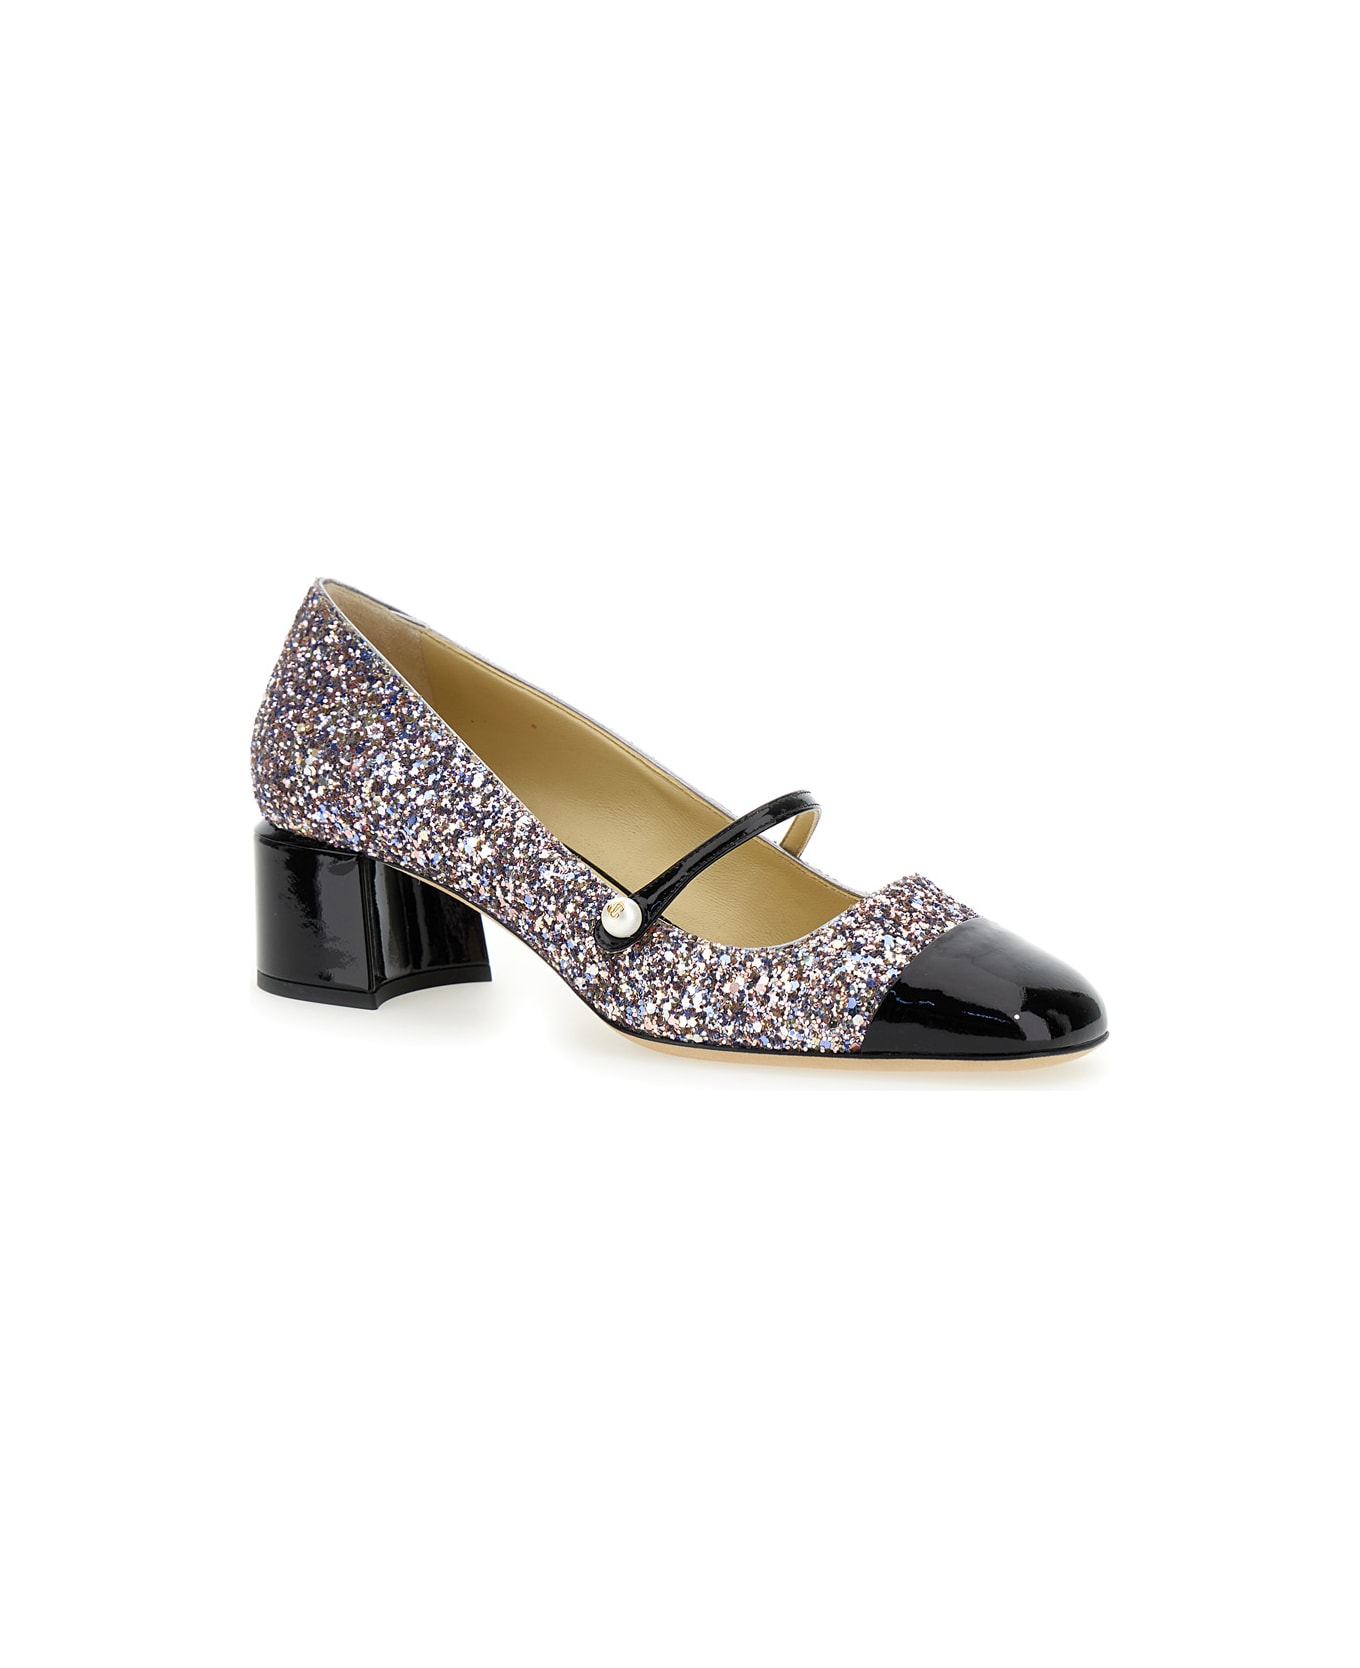 Jimmy Choo 'elisa 45' Multicolor Pumps With Block Heel In Glitter Fabric And Patent Leather Woman - Multicolor